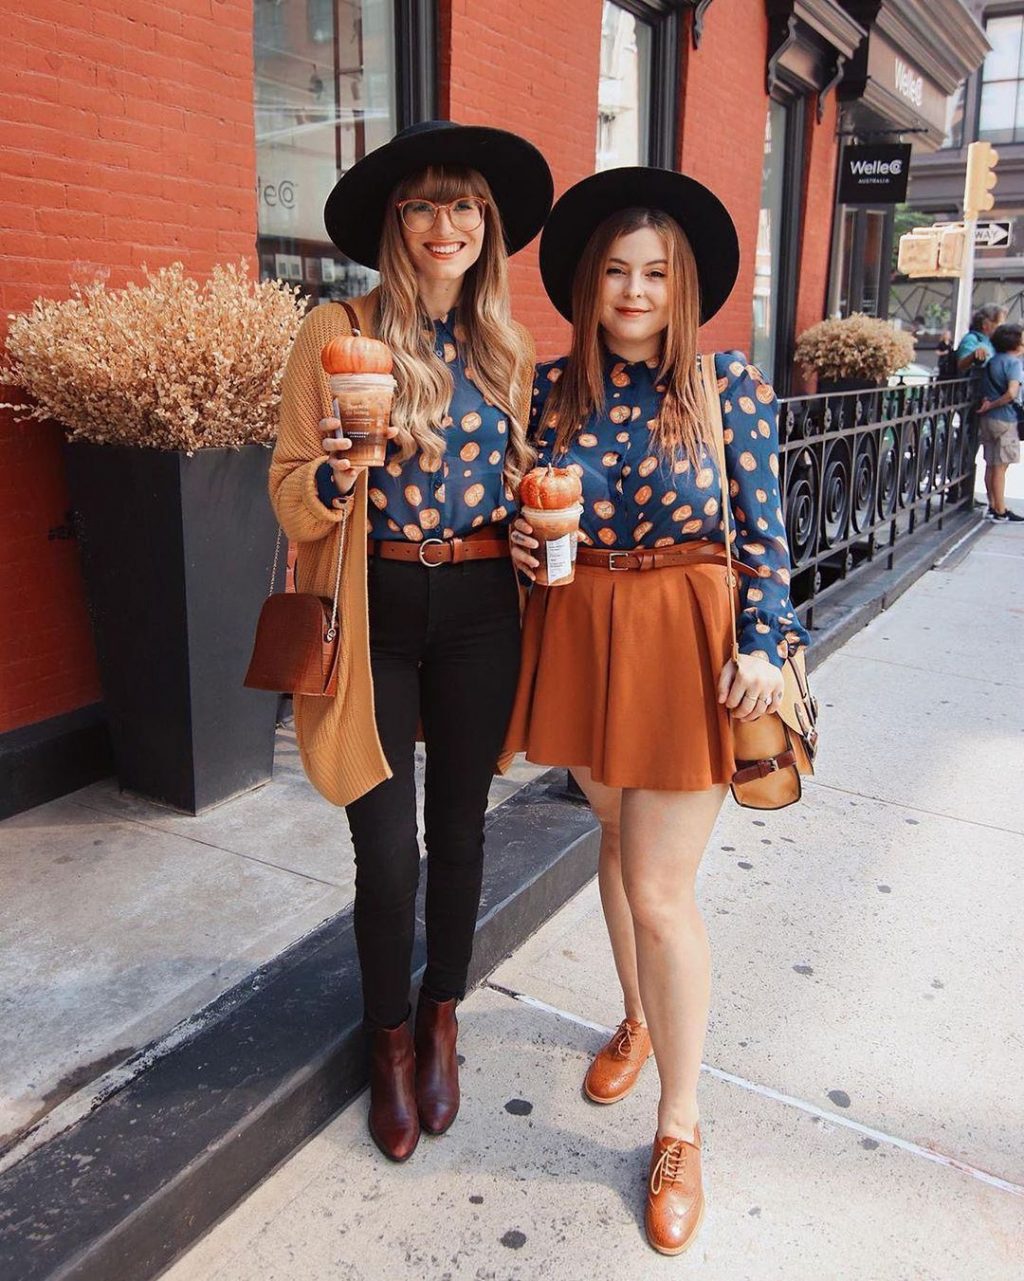 25 Fall Photoshoot Ideas You'll Want To Try